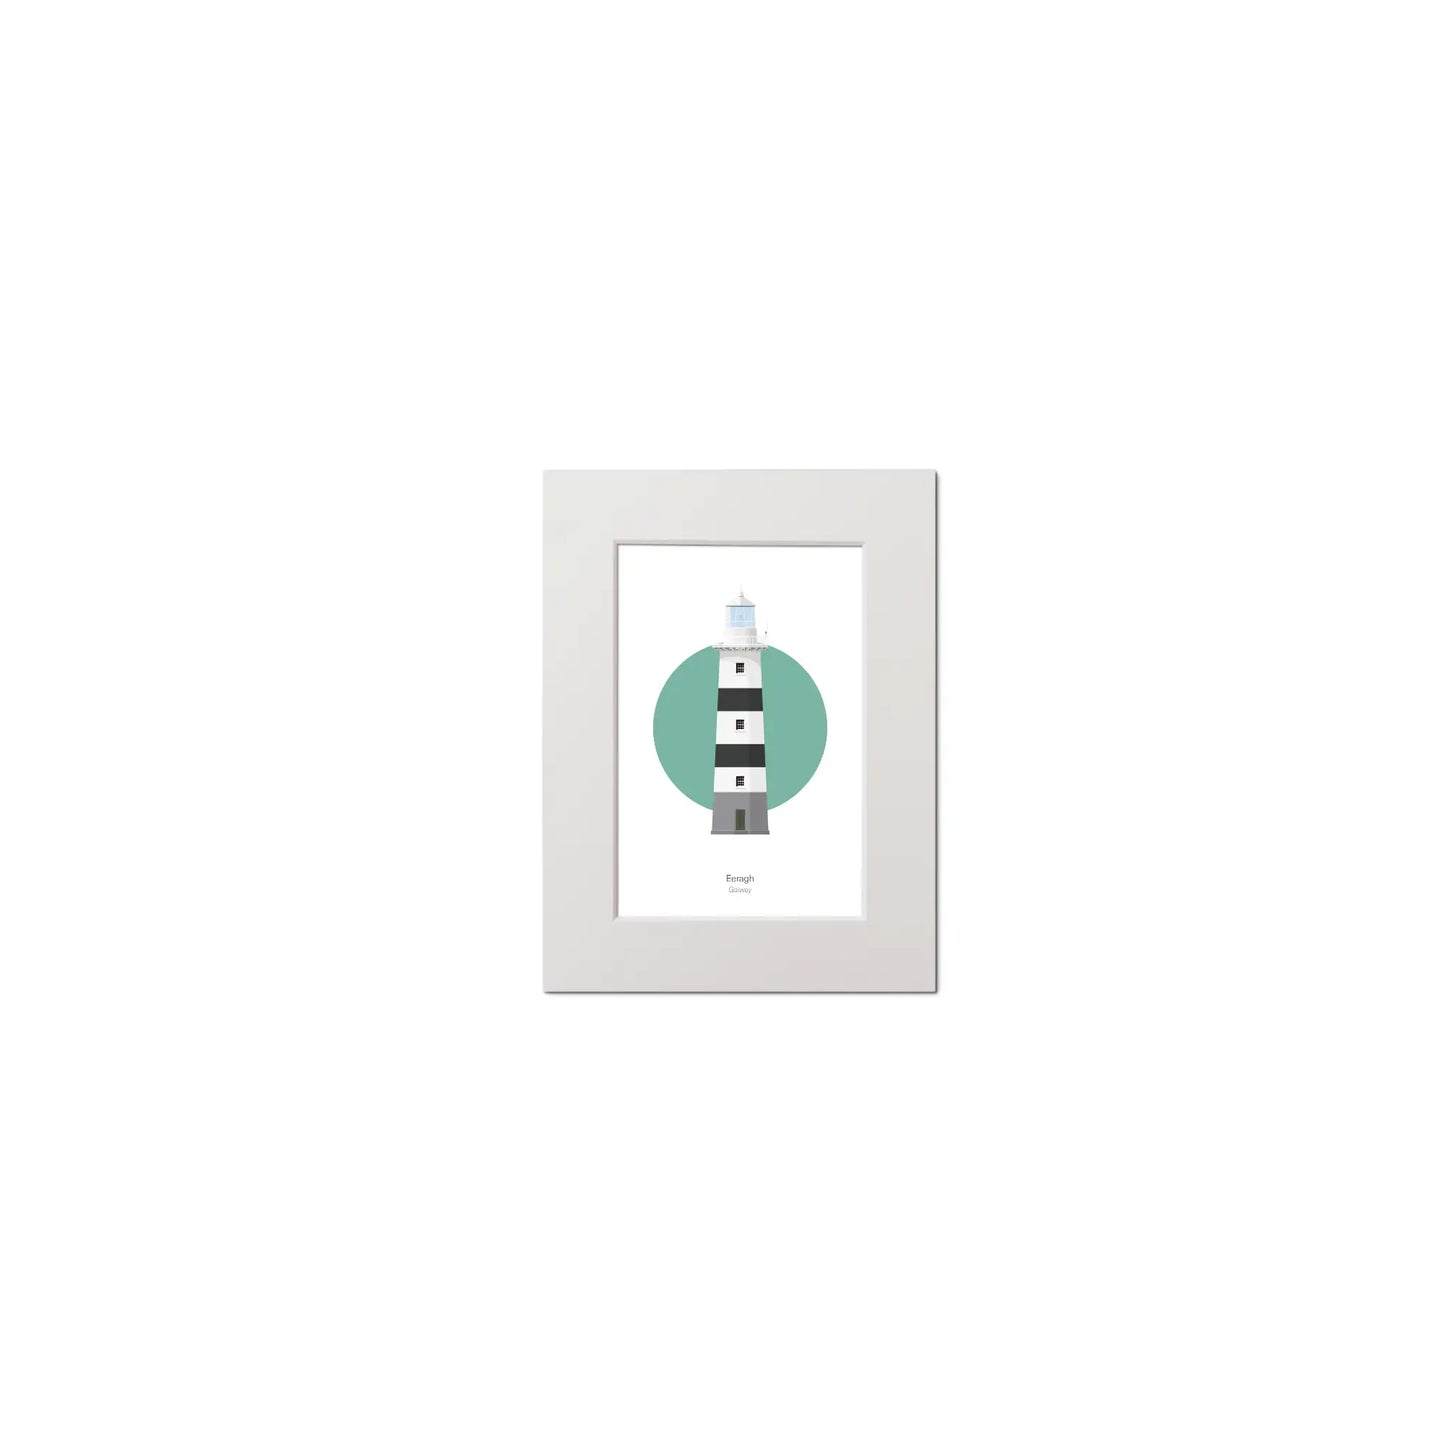 Contemporary graphic illustration of Eeragh lighthouse on a white background inside light blue square, mounted and measuring 15x20cm.